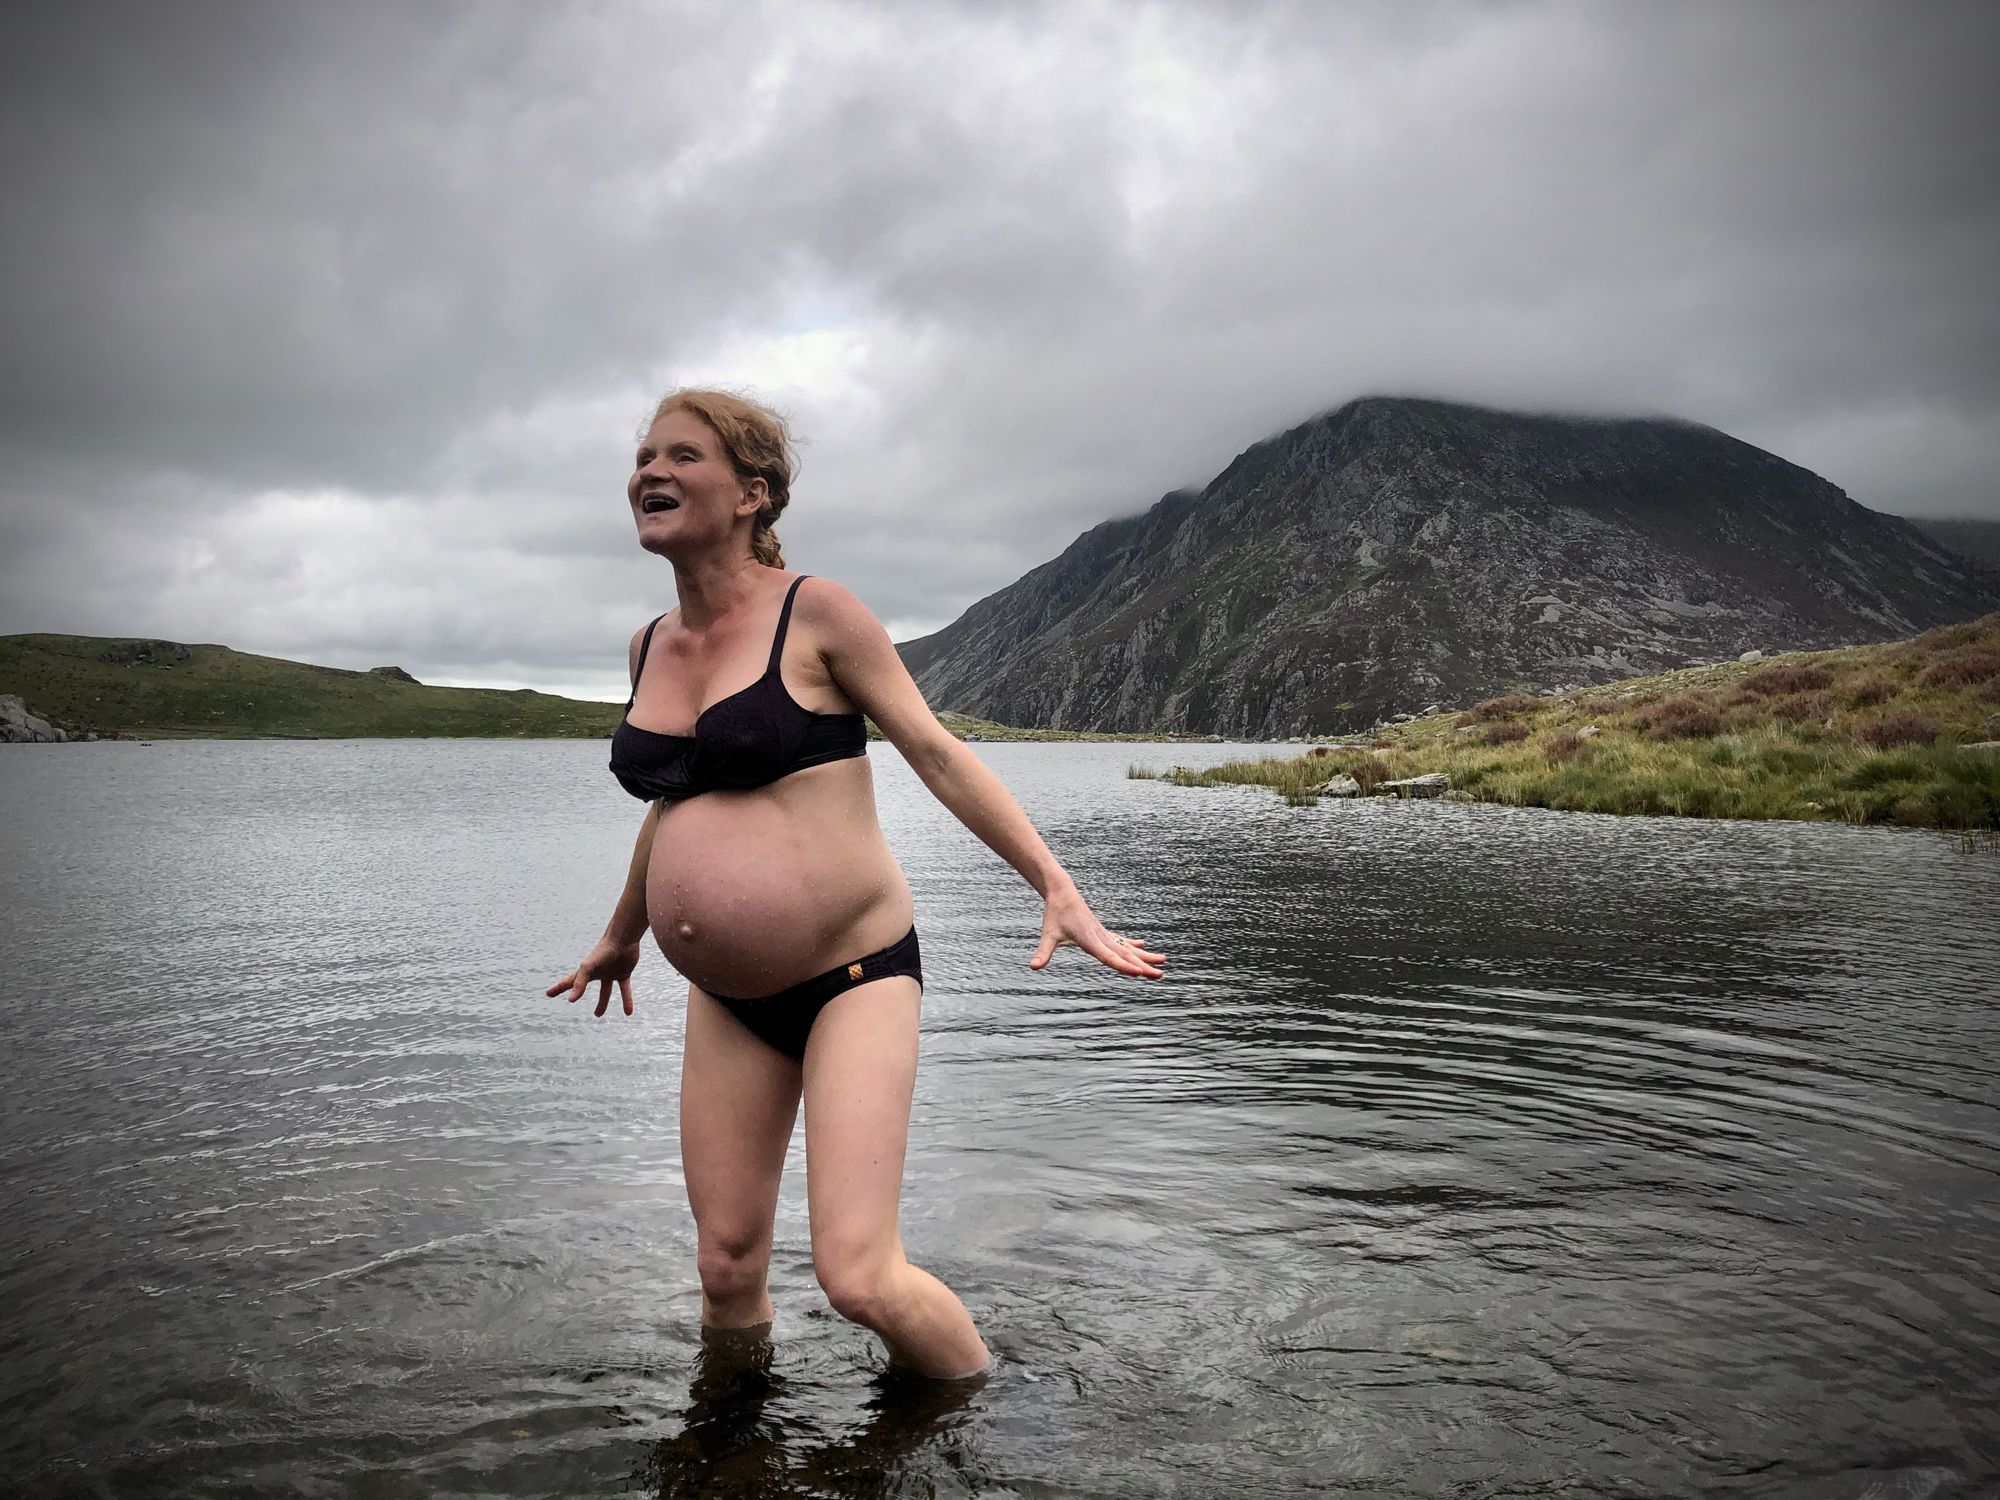 A pregnant woman goes wild swimming.